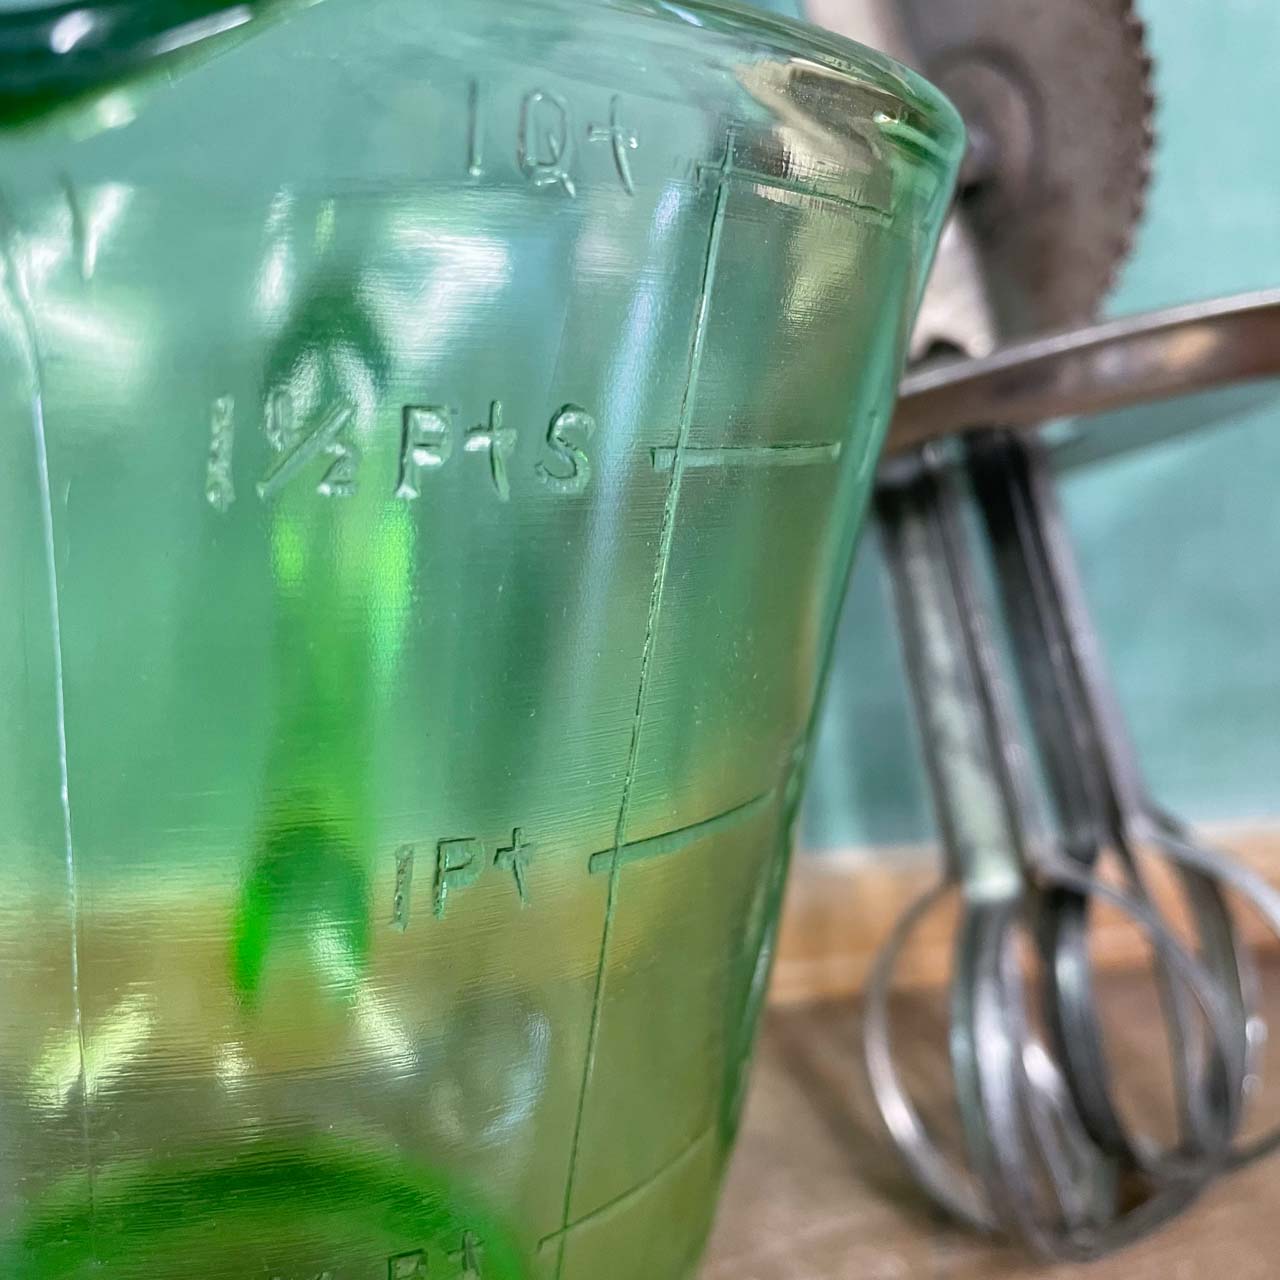 https://thejunkparlor.com/wp-content/uploads/2022/03/green-glass-4-cup-hand-mixer-beater-kitchen-vintage-3.jpeg